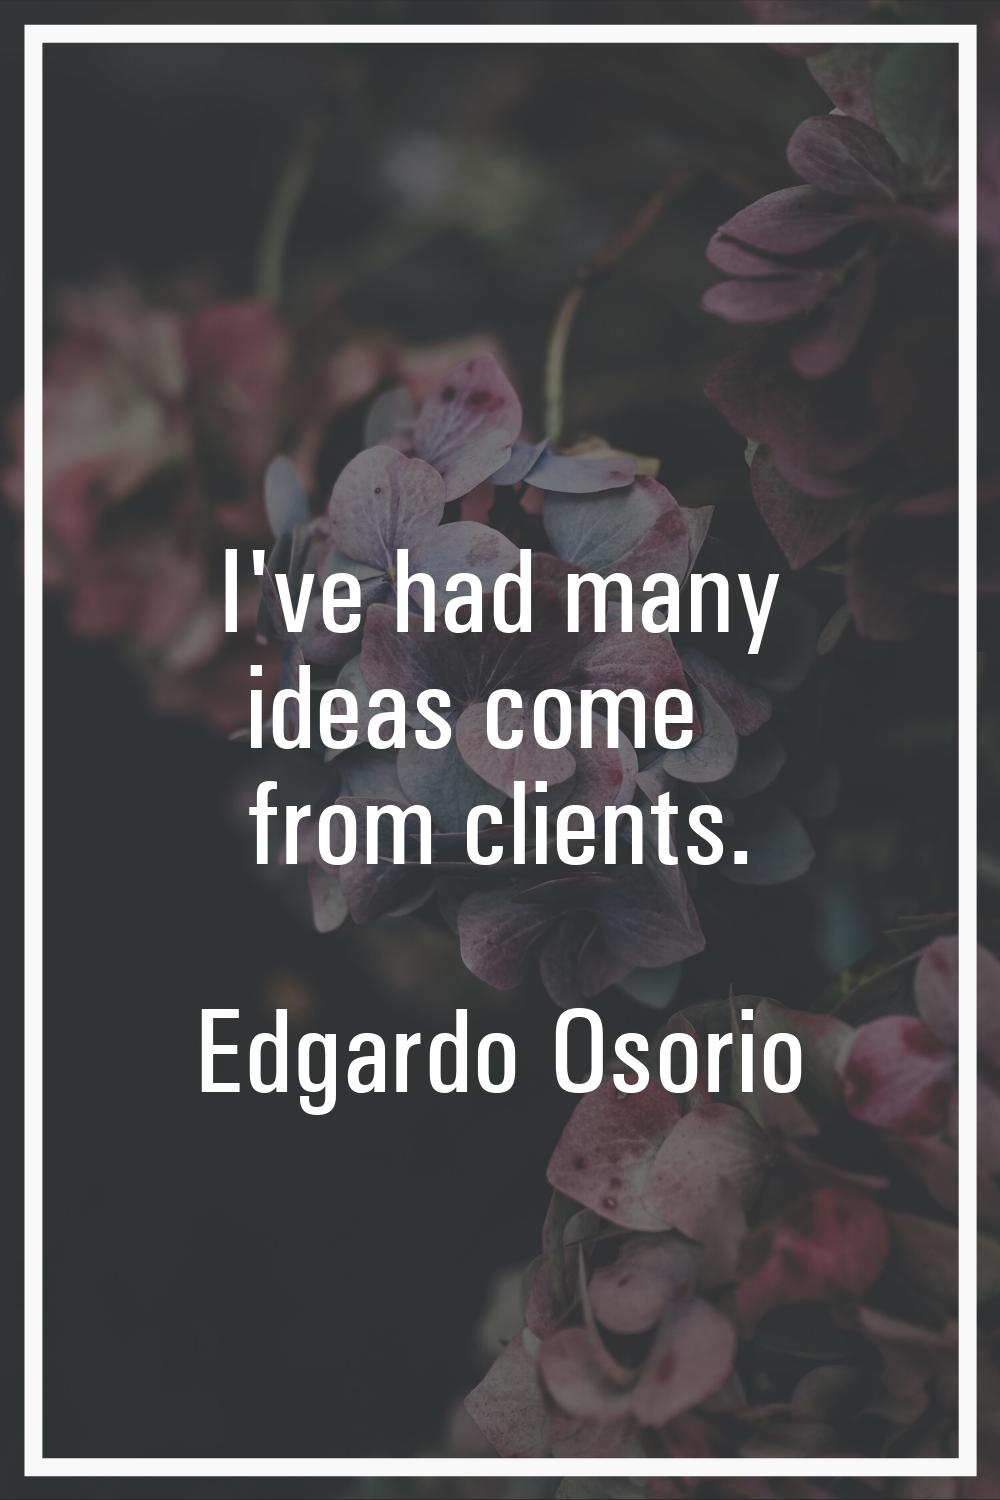 I've had many ideas come from clients.